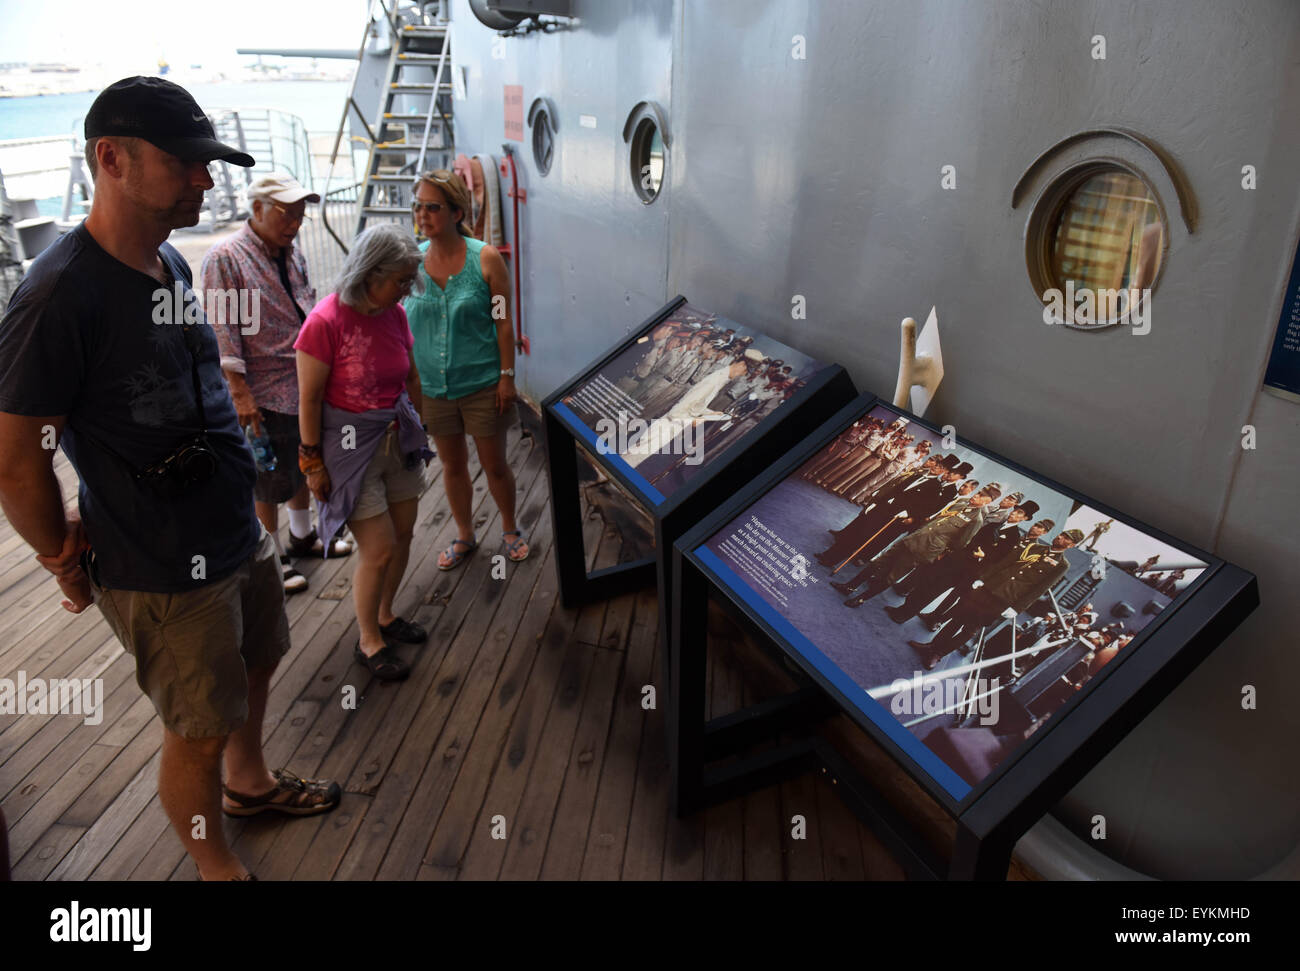 Hawaii, USA. 30th July, 2015. Tourists view pictures of Japanese surrender ceremony at USS Missouri (BB-63) in Honolulu, Hawaii, the United States, July 30, 2015. USS Missouri (BB-63) was the site where Japan signed the surrender documents at the end of the World War II. In 1998, this battleship was donated to the USS Missouri Memorial Association and became a museum ship at Pearl Harbor, Hawaii. © Yin Bogu/Xinhua/Alamy Live News Stock Photo